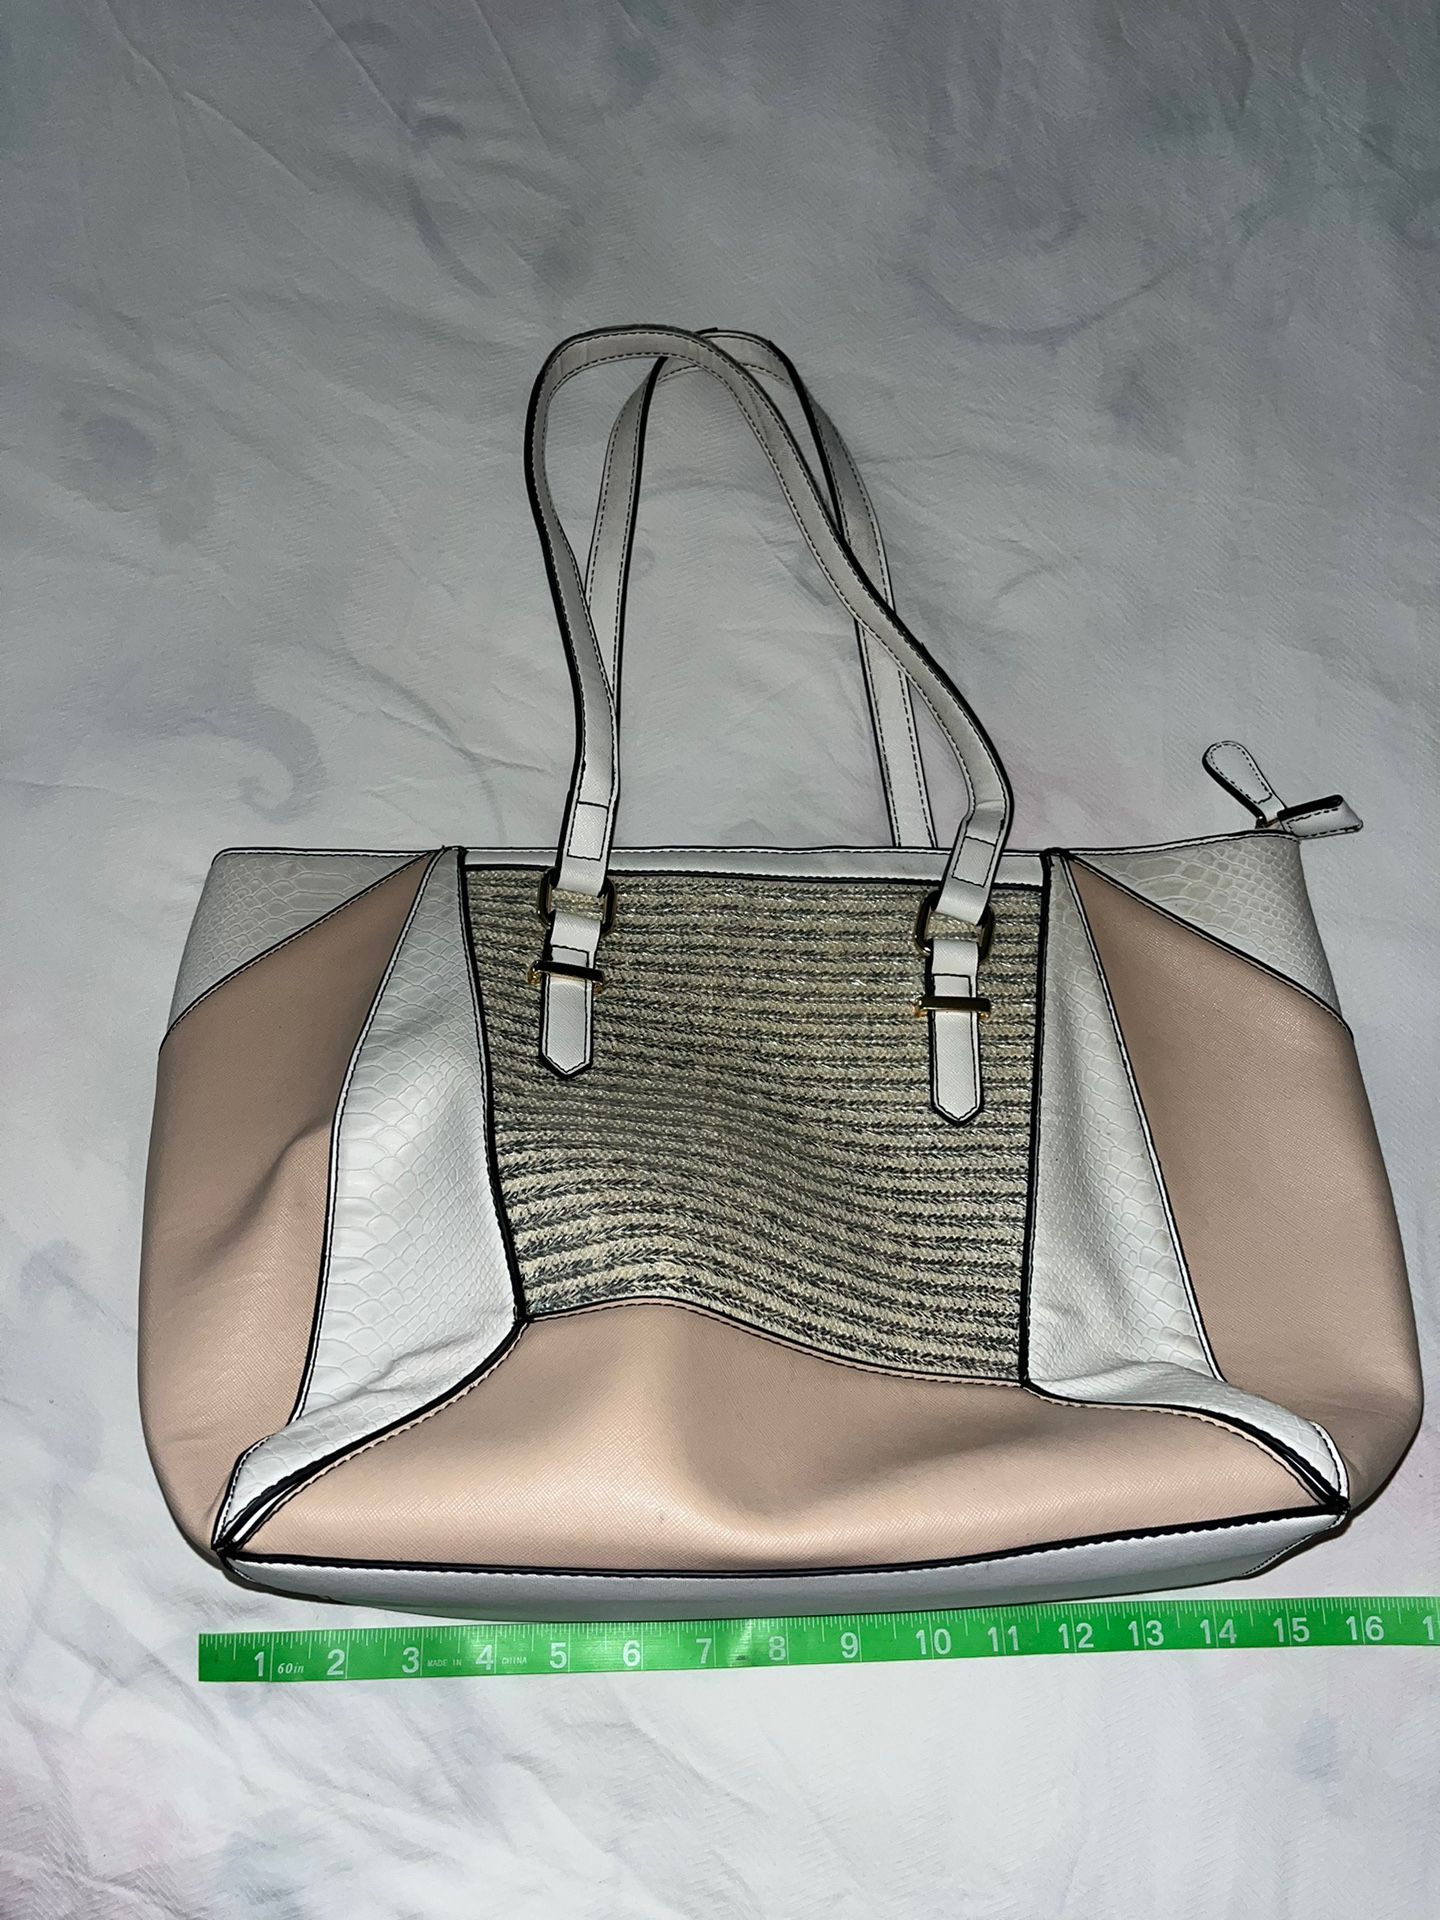 New Look White And Beige Tote Bag for Sale in Osbornville, NJ - OfferUp